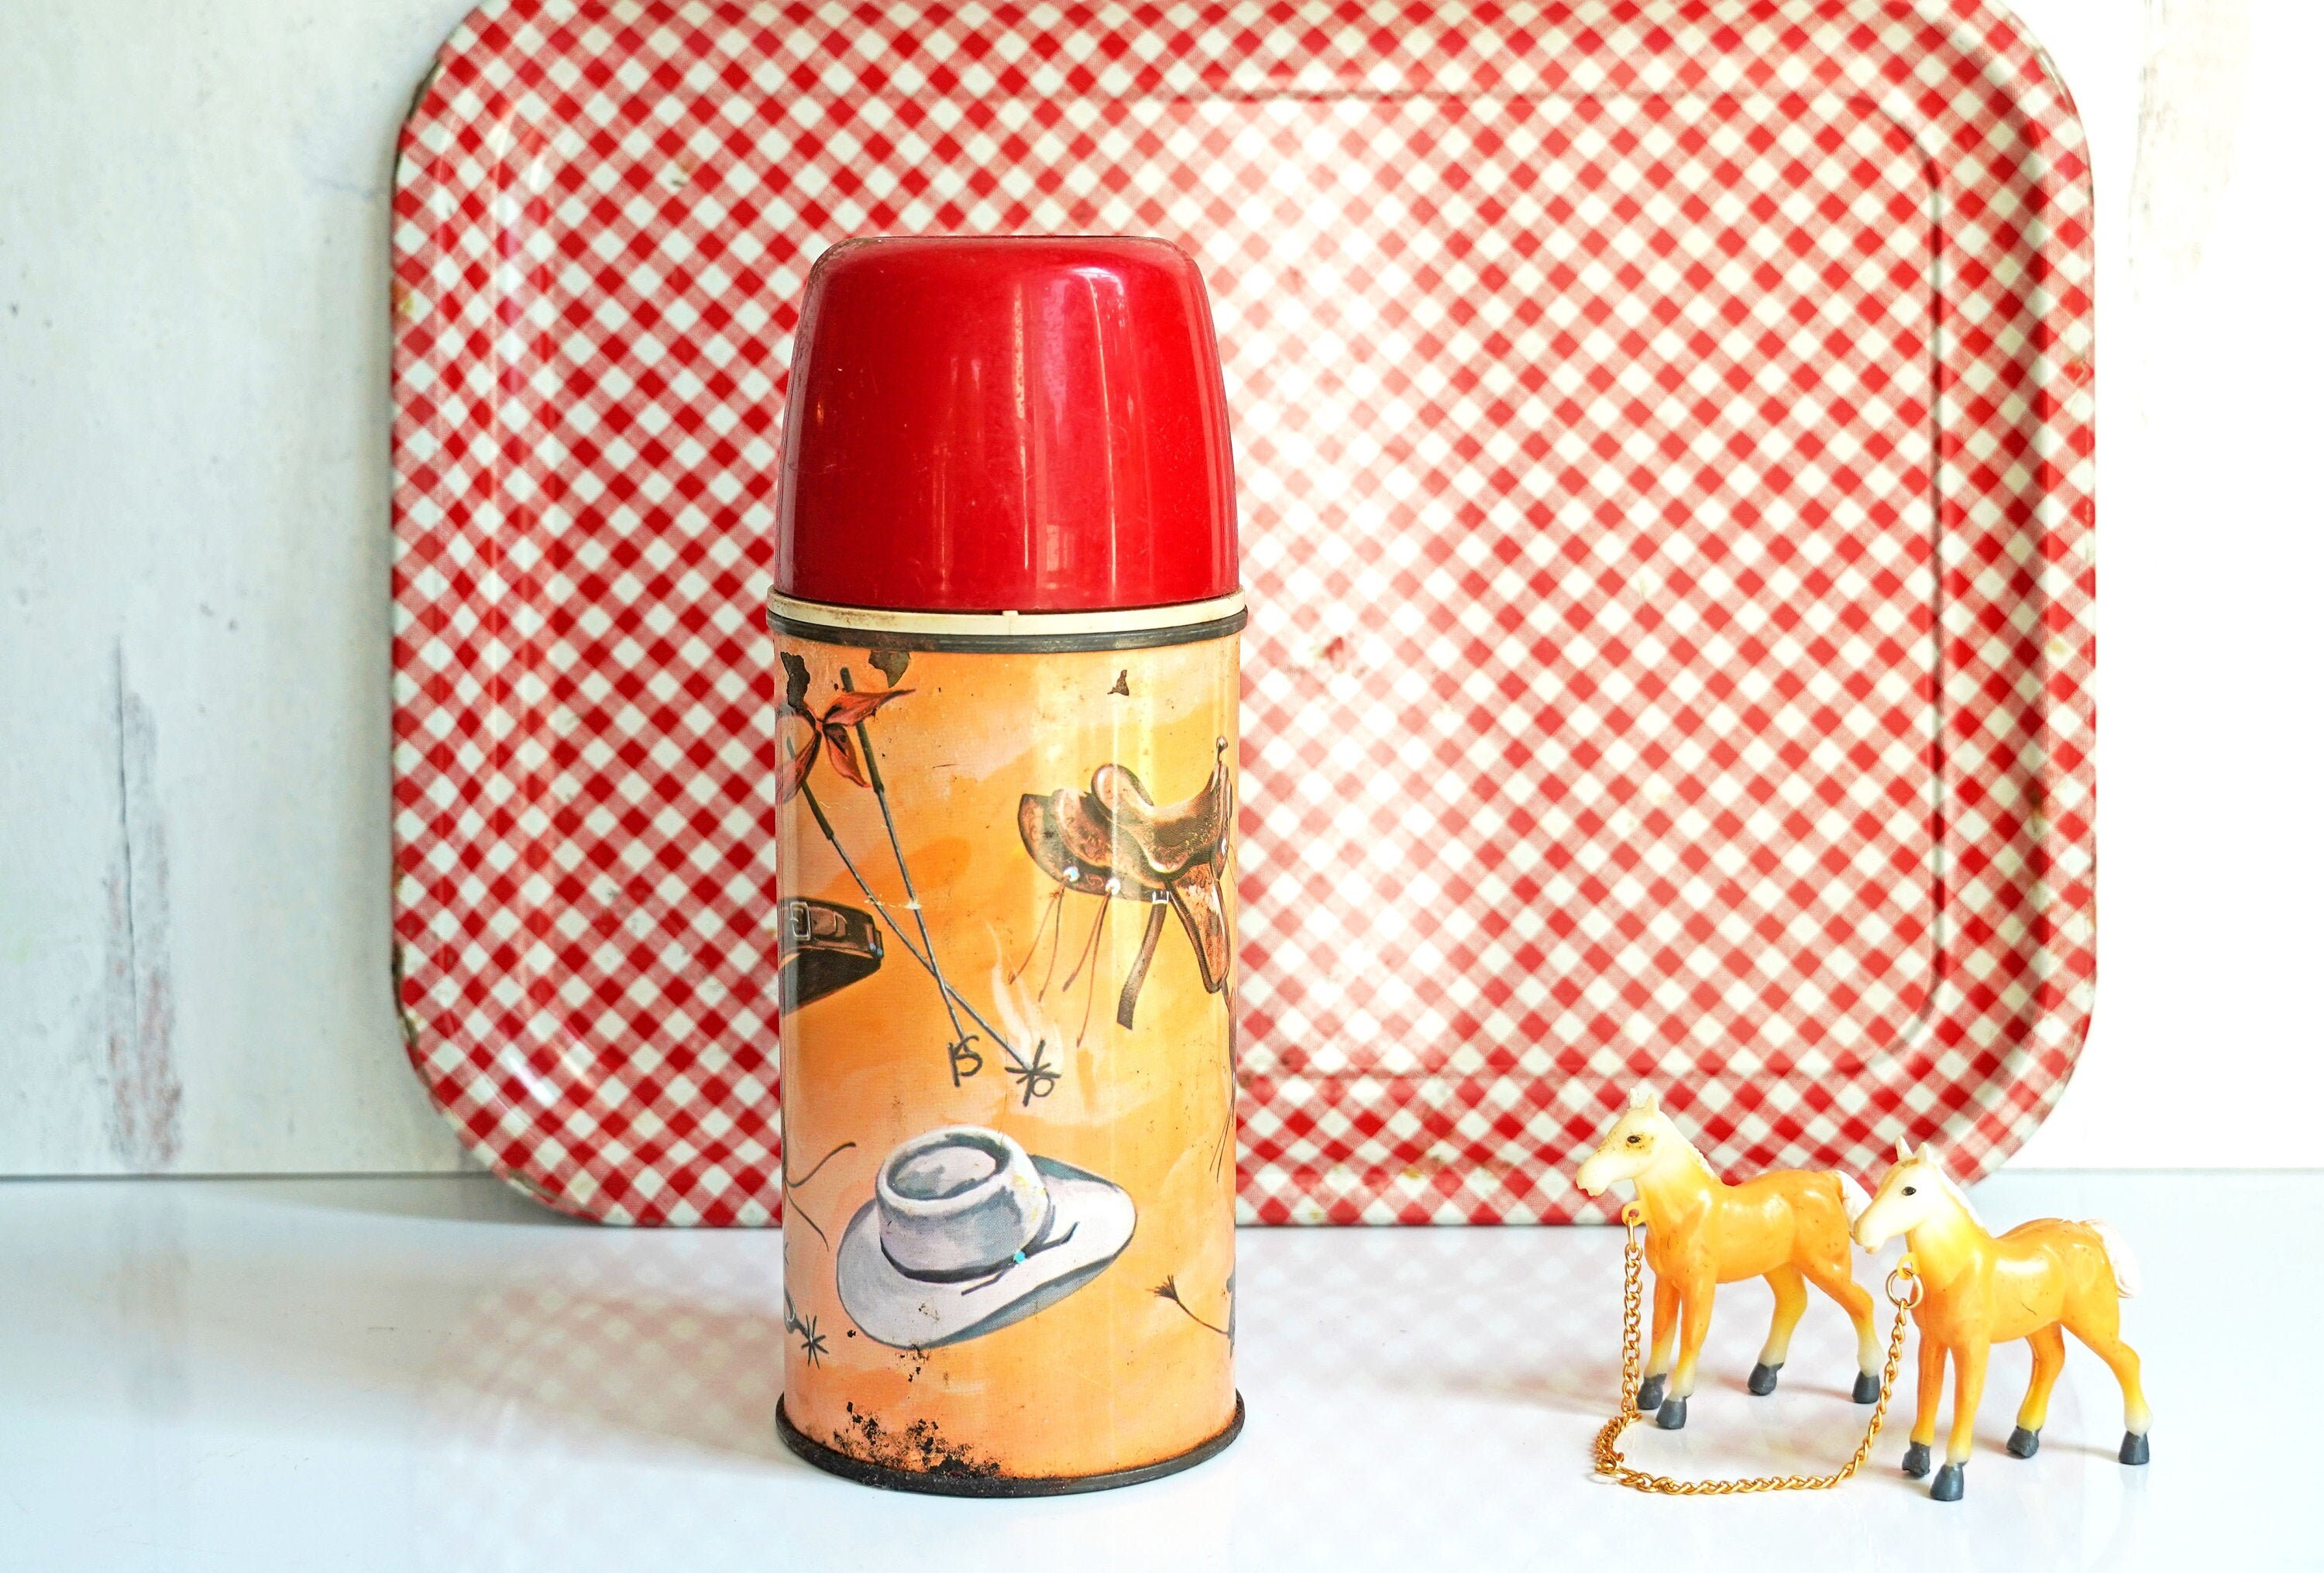 Cowboy Personalized Kids Thermos